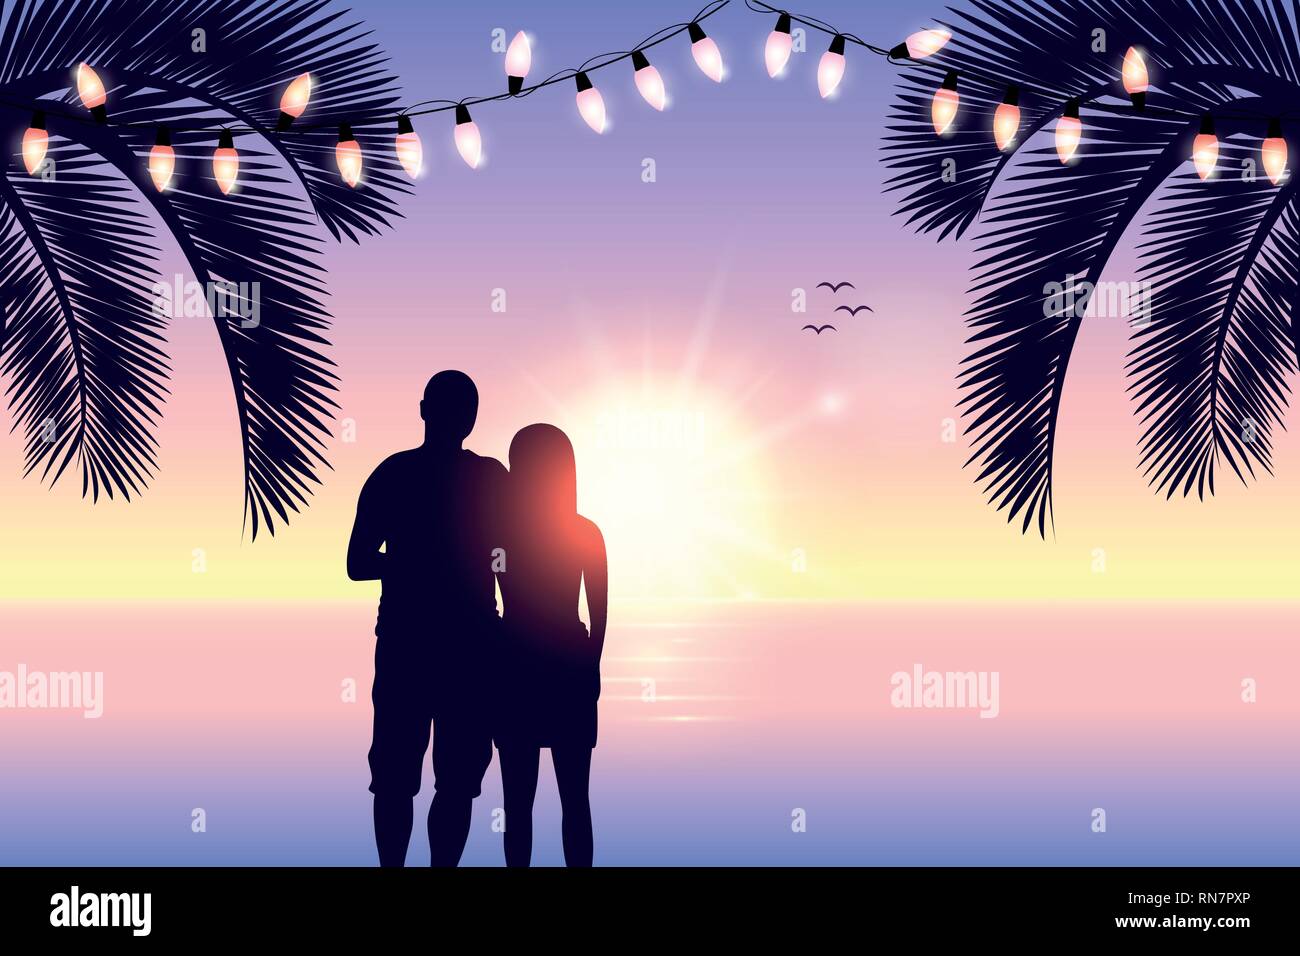 couple in love silhouette romantic day on paradise beach vector illustration EPS10 Stock Vector